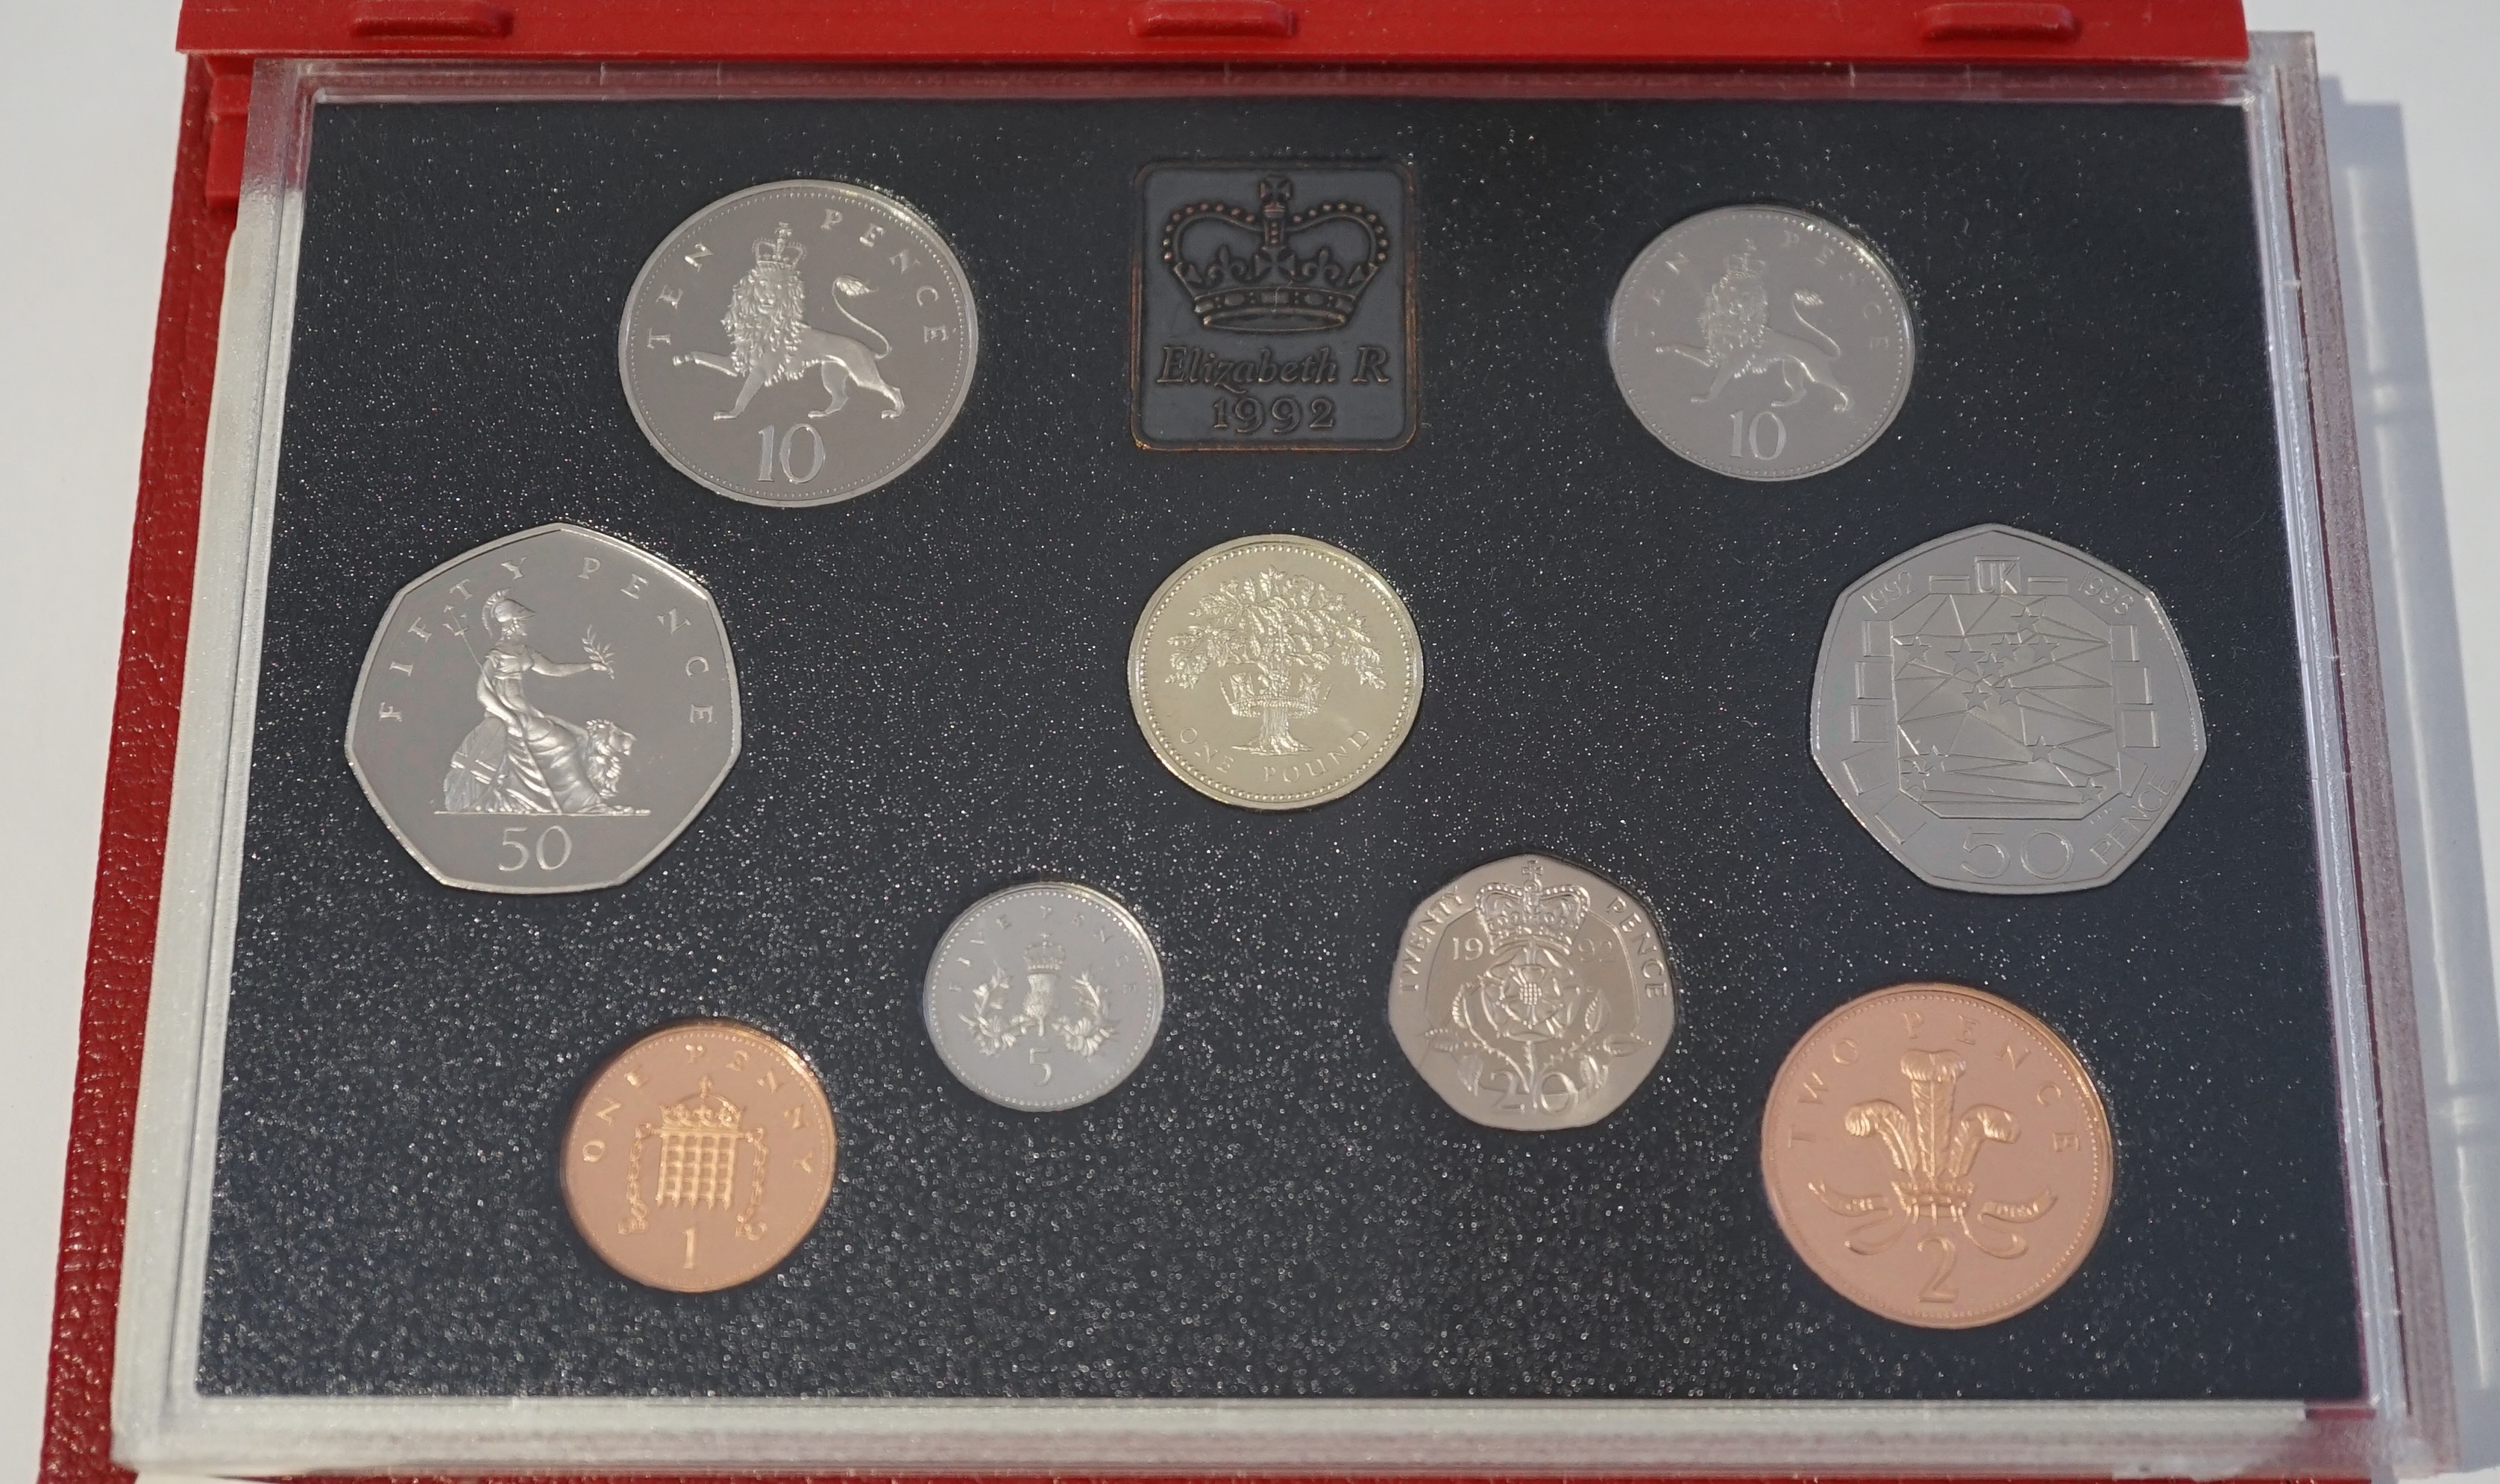 British coins, Elizabeth II, two proof coin collection year sets for 1992 and 1986, together with ten brilliant uncirculated coins of Great Britain and Northern Ireland 1979 year sets, a Golden jubilee crown and three Po